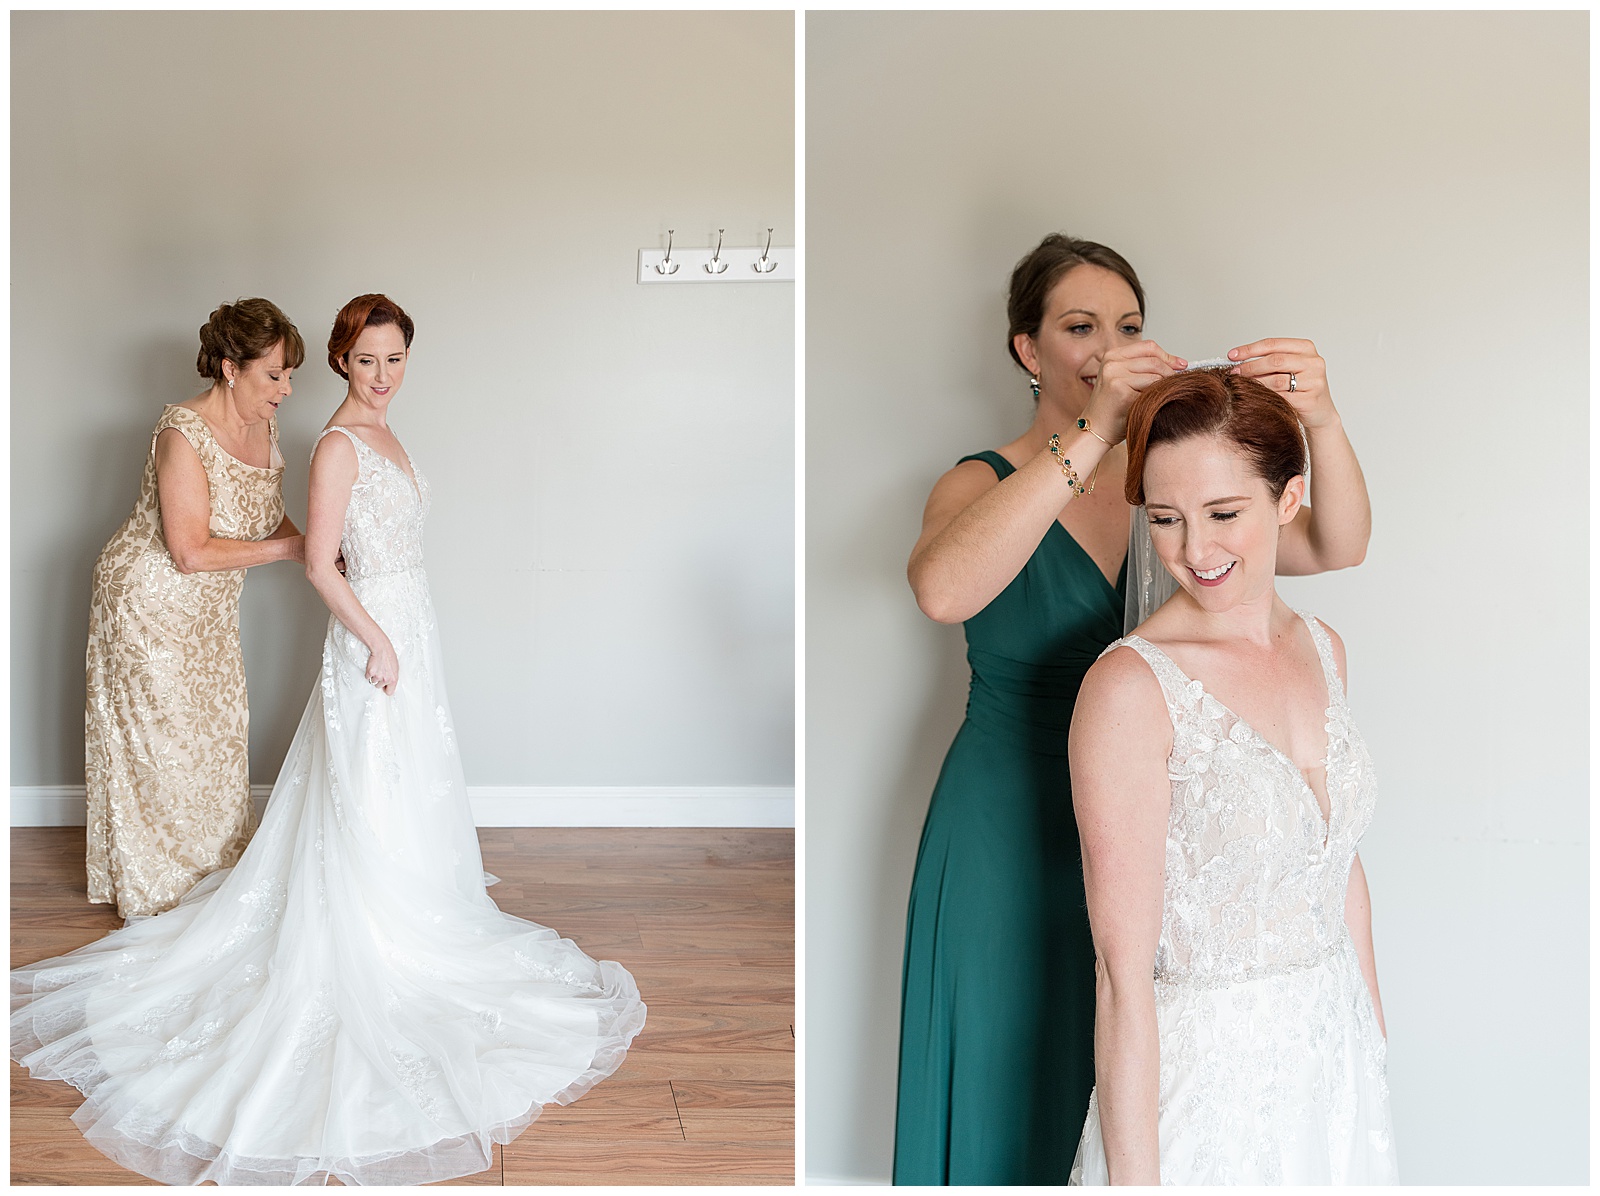 mother of the bride zipping up the back of bride's white gown inside bridal suite on wedding day